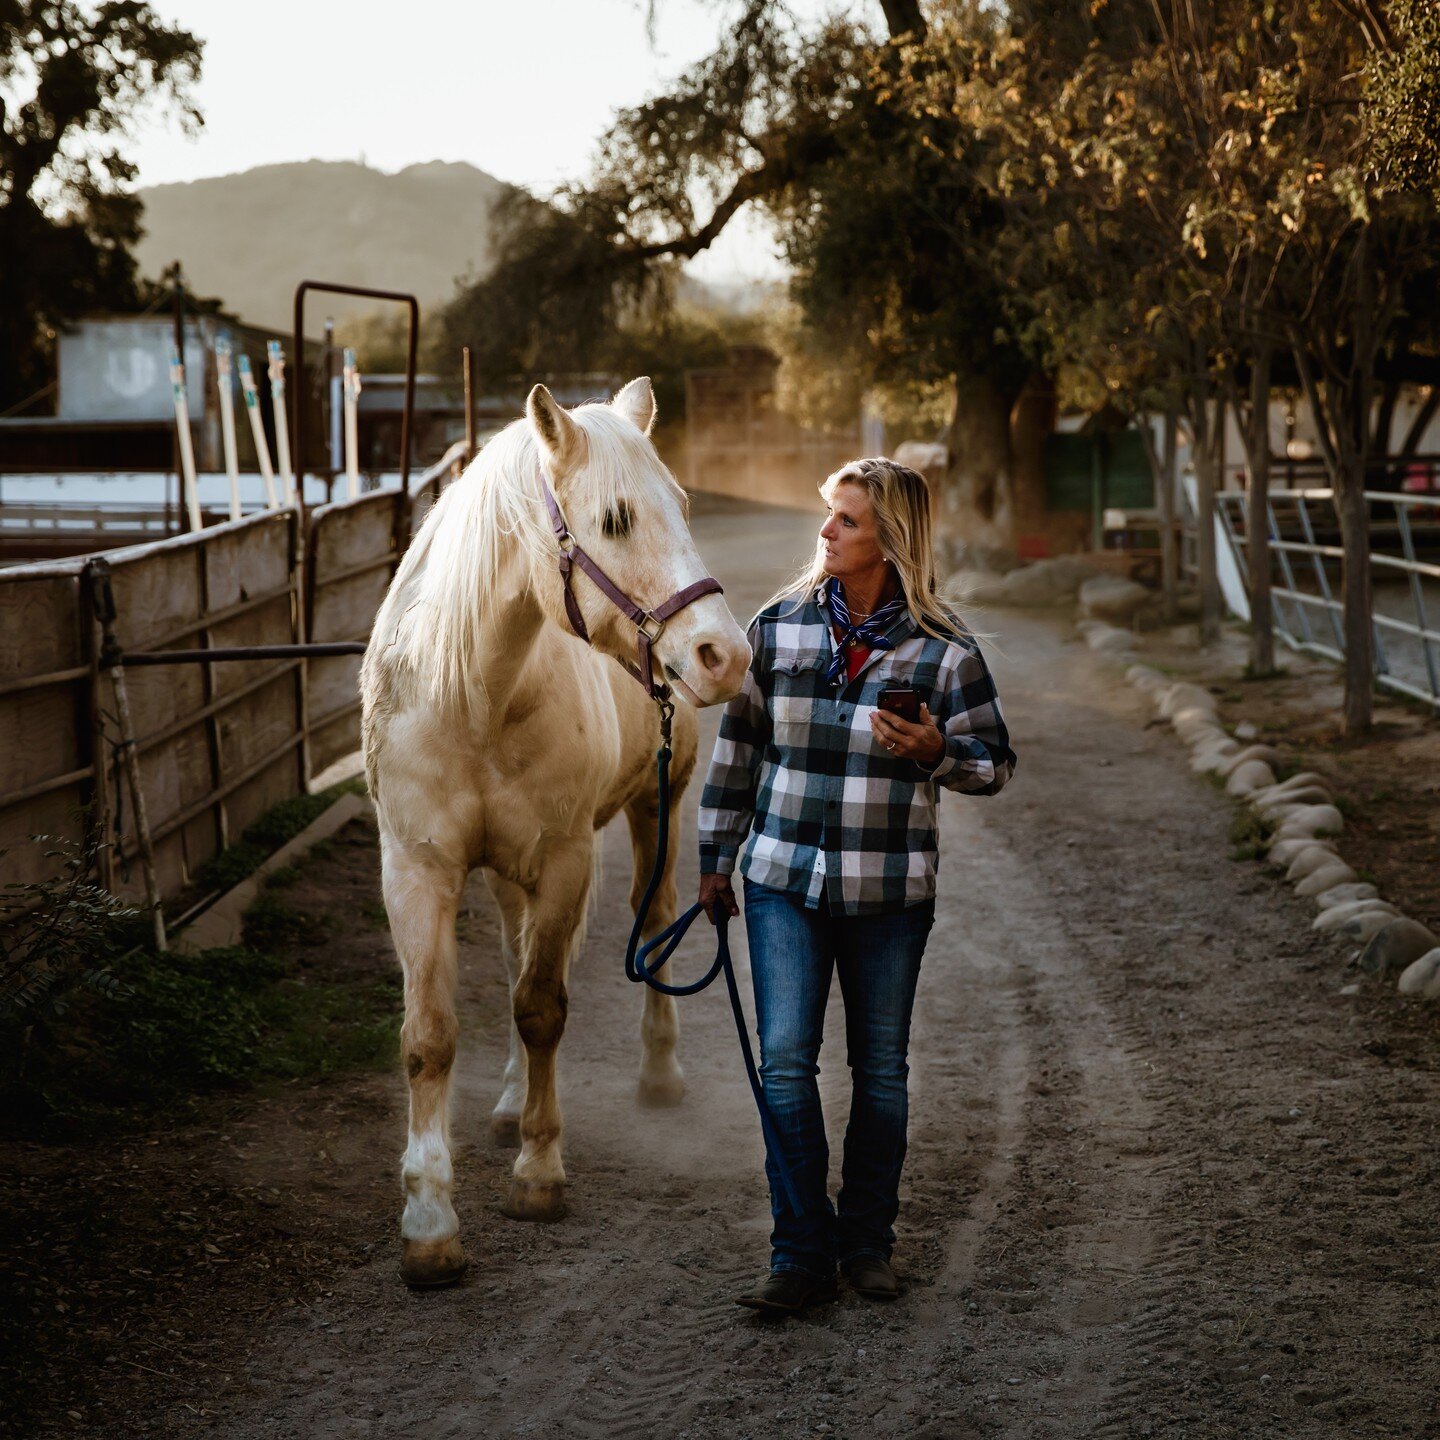 My latest Ojai profile piece is one that's particularly meaningful to me. Sue Gruber is the owner of Oso Ranch, home to @ojaivalleytrailriding which offers nature rides into the Ventura River Preserve.
Her ranch is also where I lease my horse Suzy. S